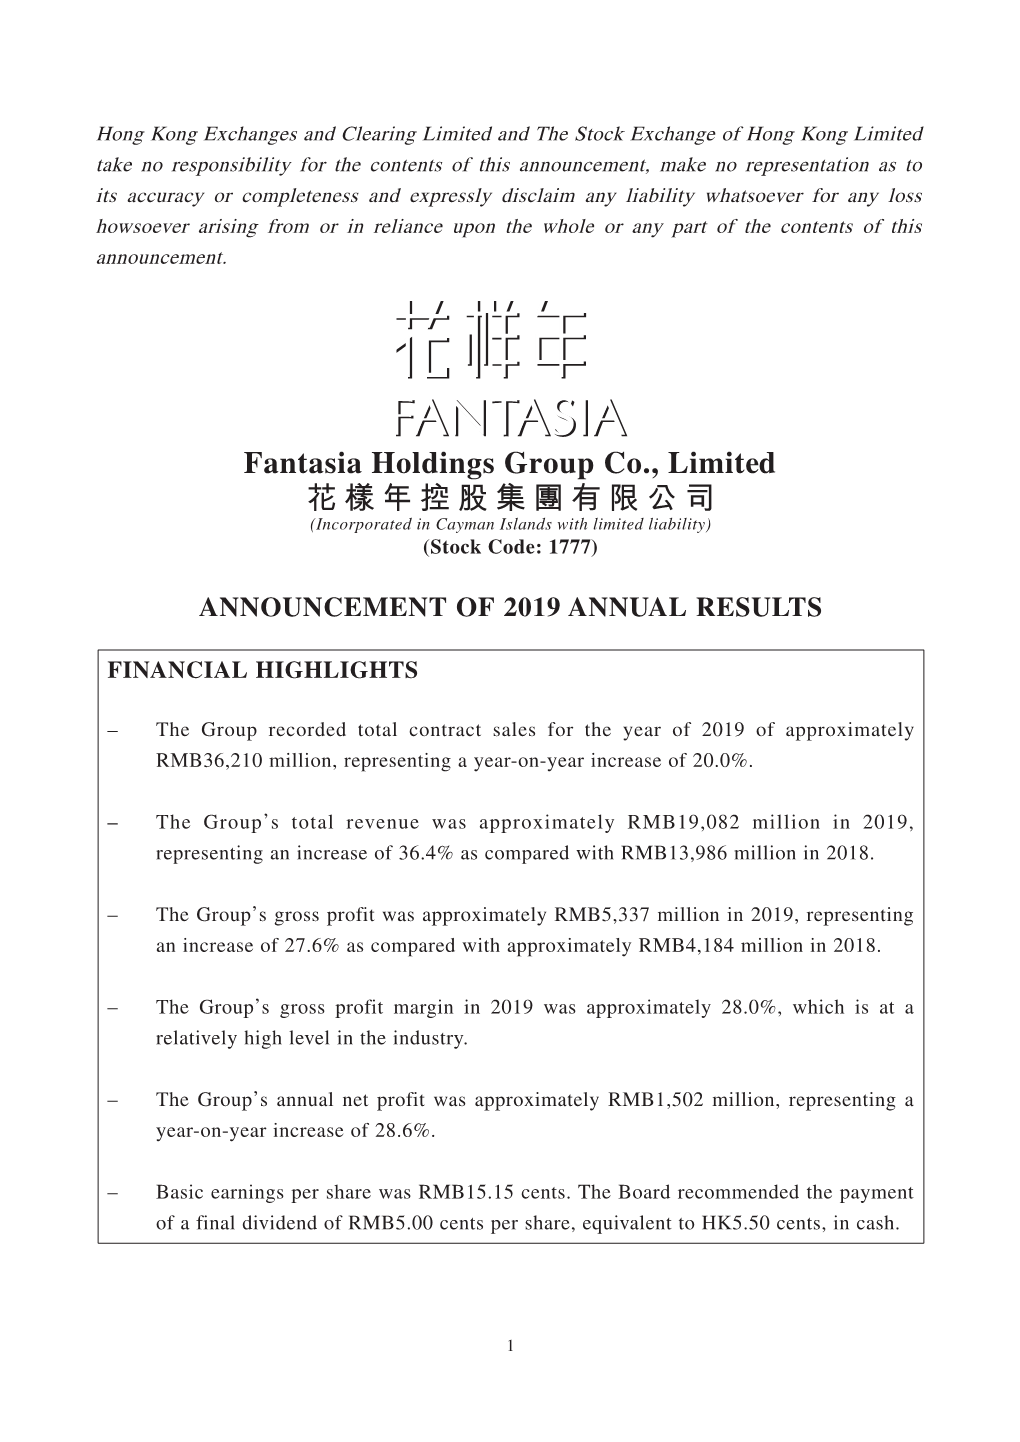 Fantasia Holdings Group Co., Limited 花樣年控股集團有限公司 (Incorporated in Cayman Islands with Limited Liability) (Stock Code: 1777)